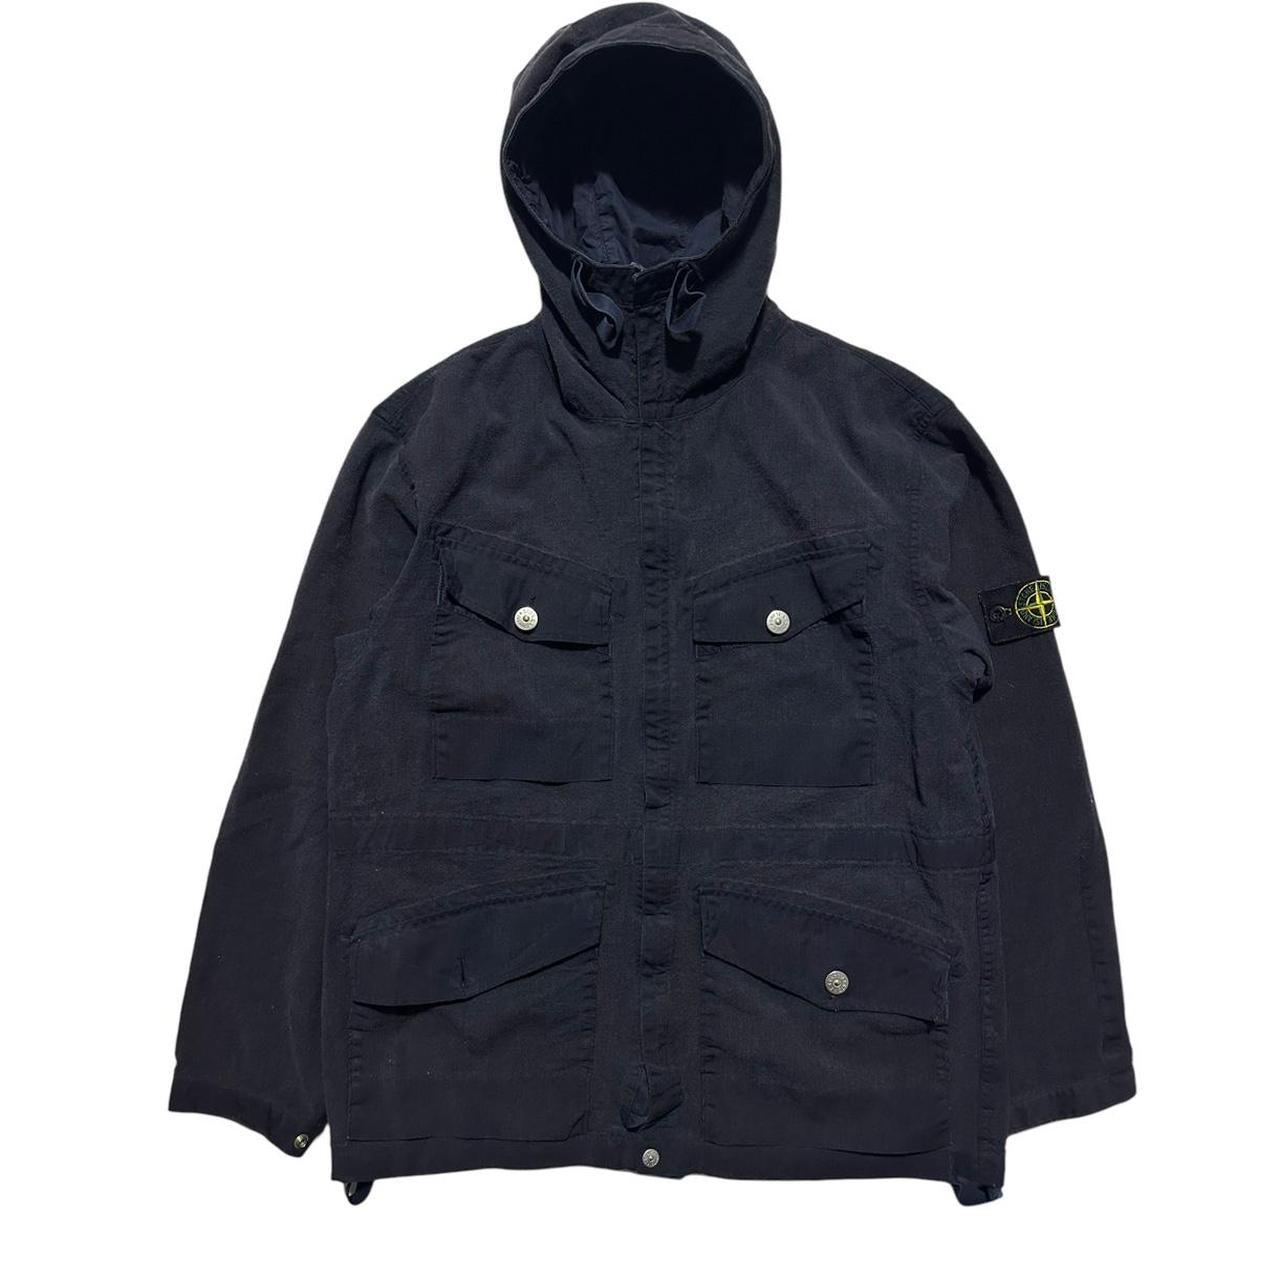 Stone Island Multipocket Jacket - Known Source